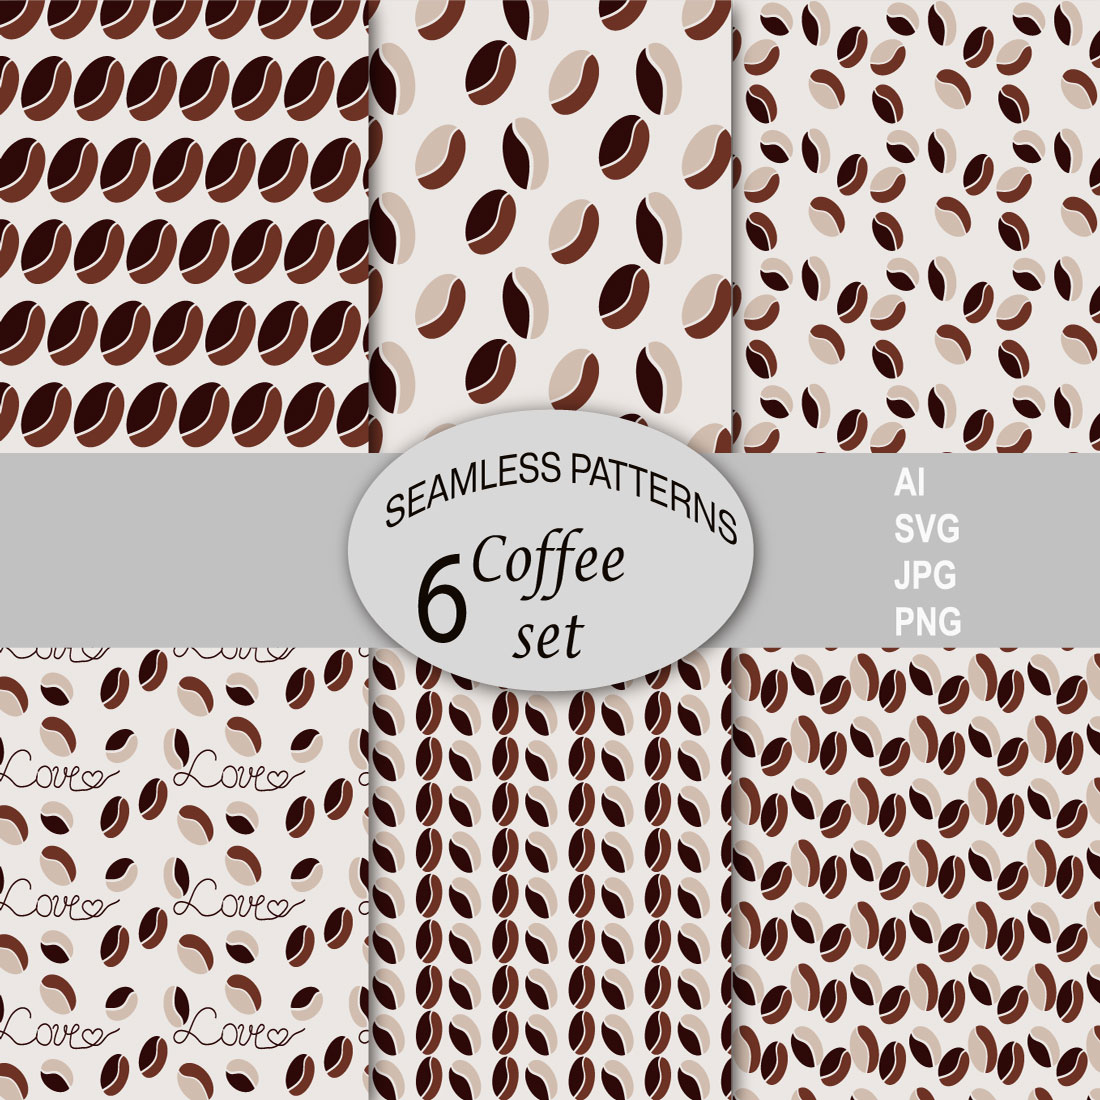 6 seamless patterns: COFFEE SET cover image.